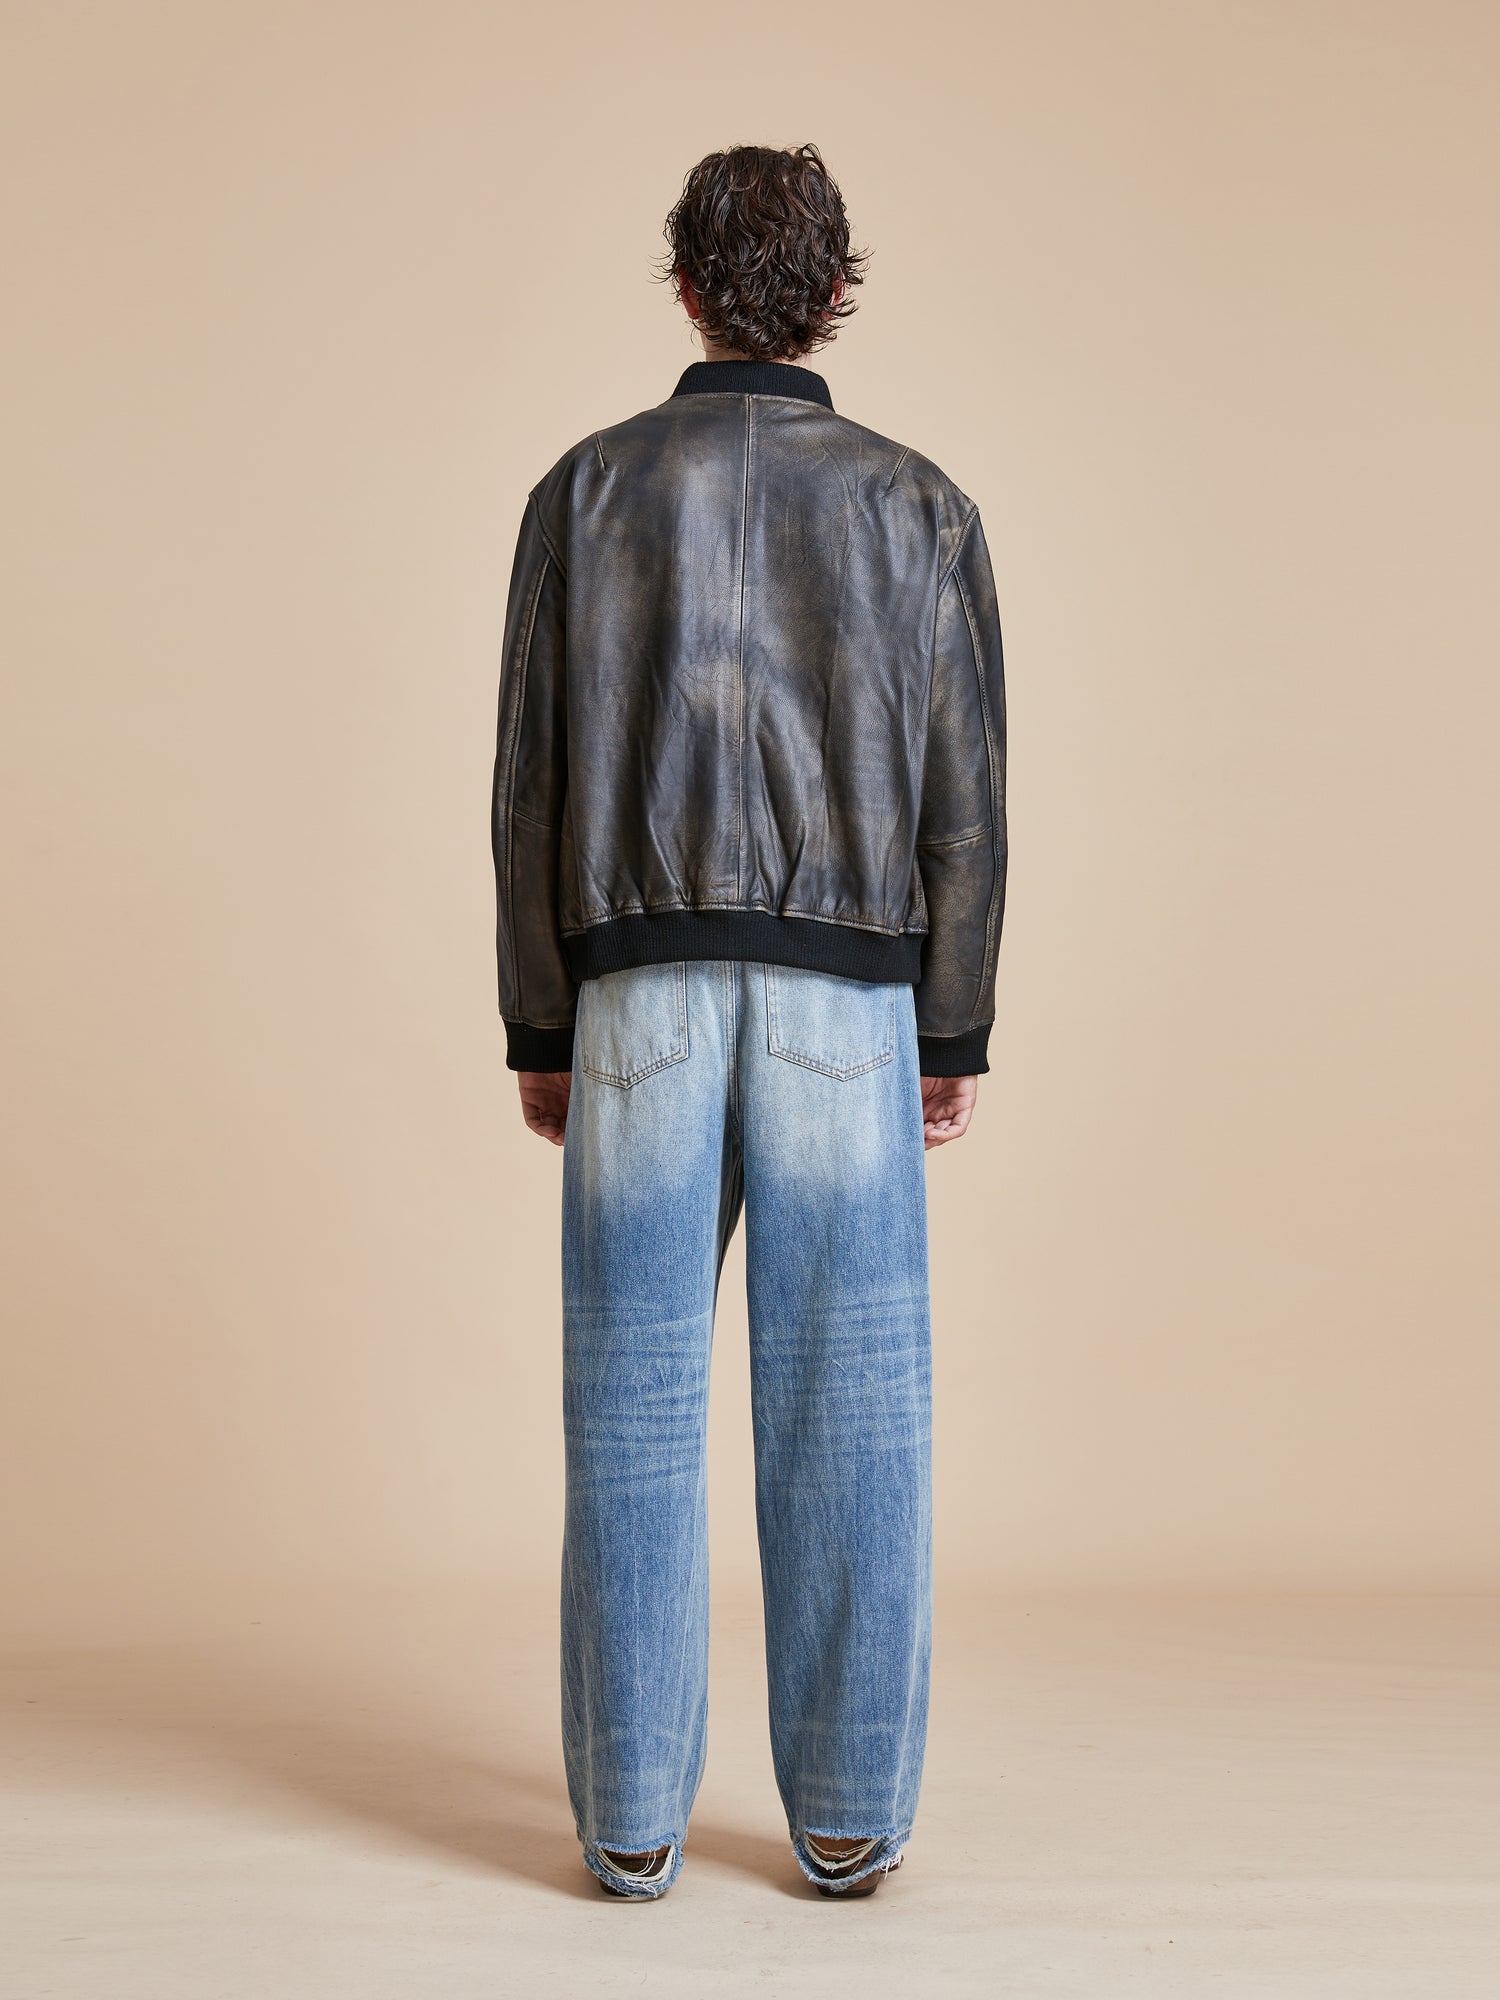 The back view of a man wearing jeans and a Found Distressed Pavement Leather Bomber Jacket.